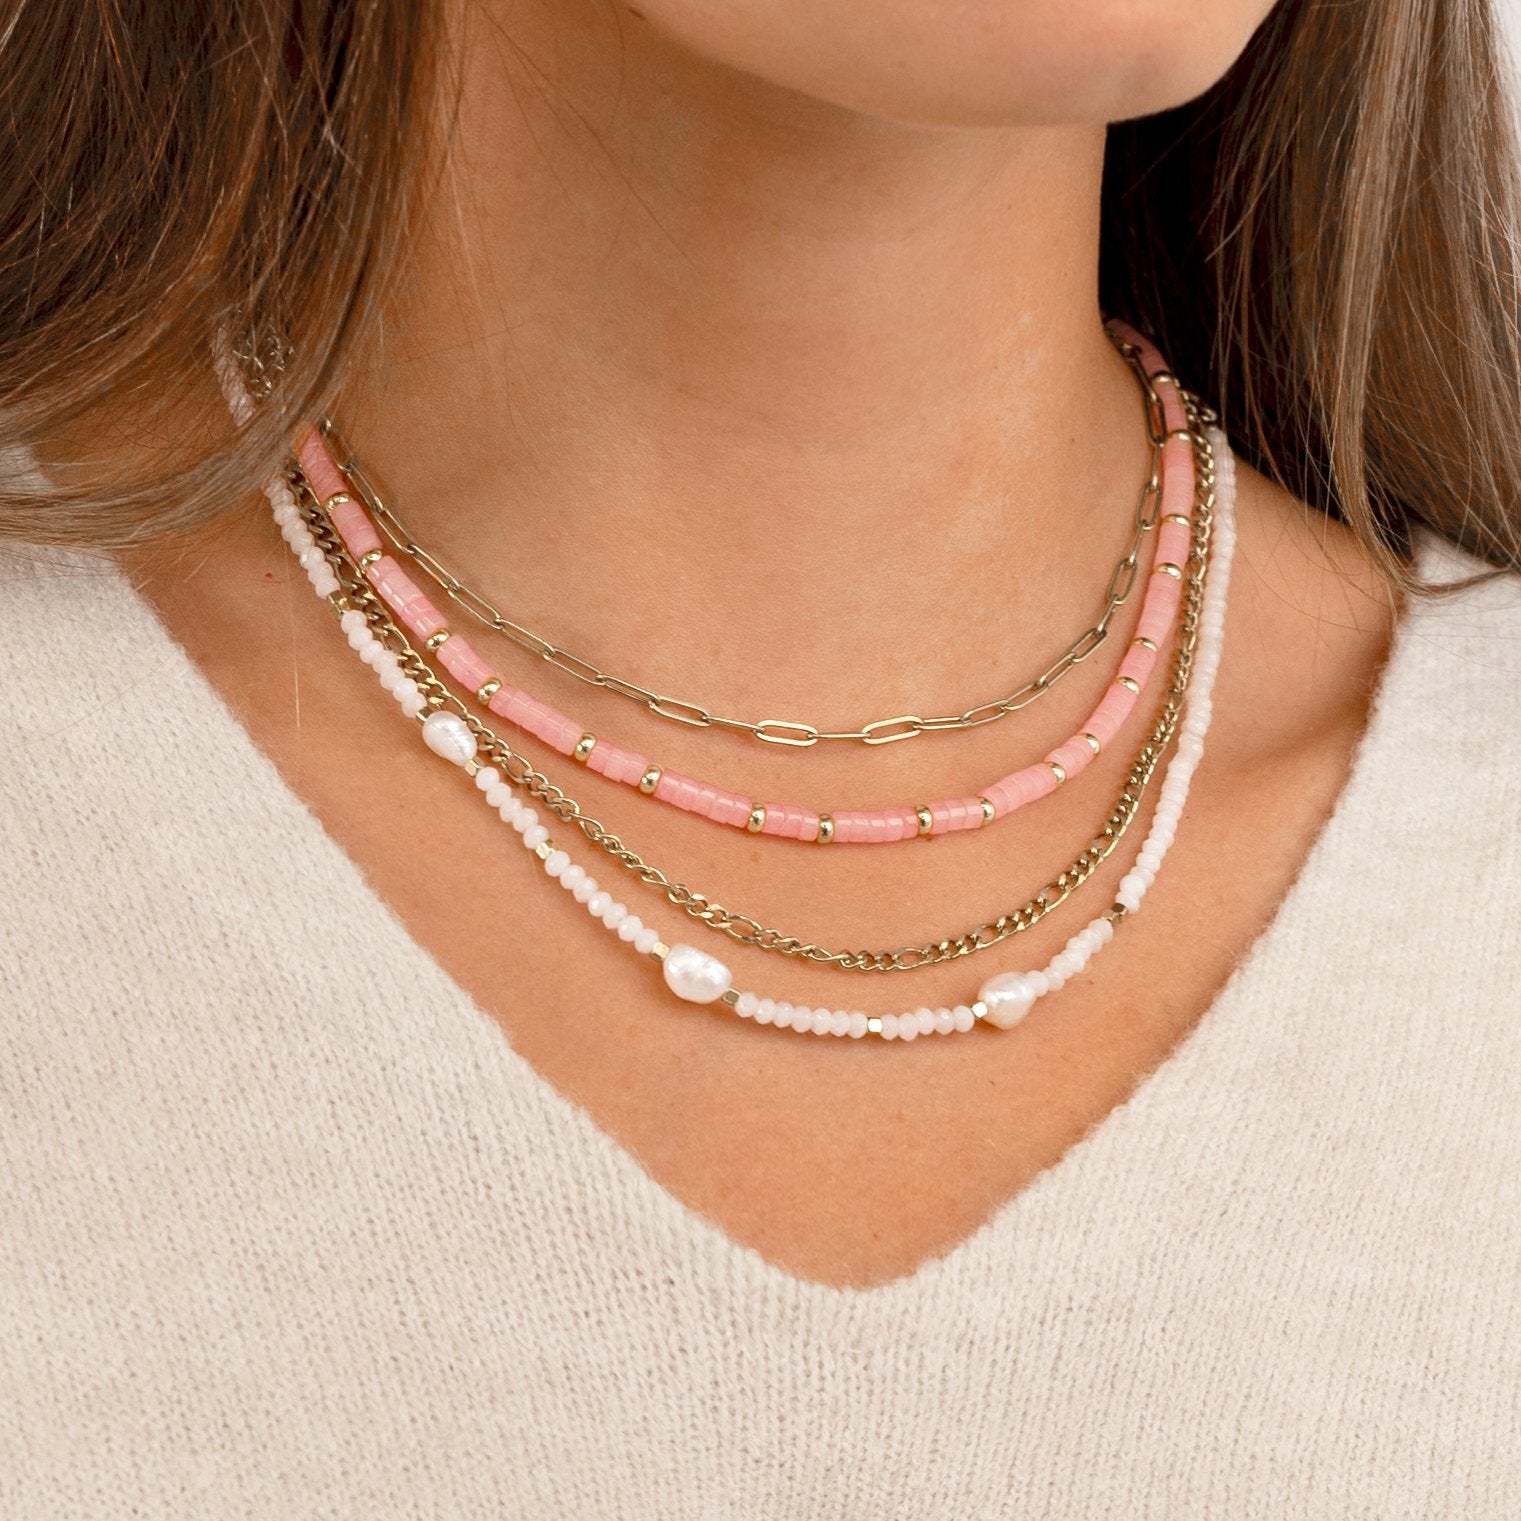 Necklace Crystalline Pink made with rose quartz